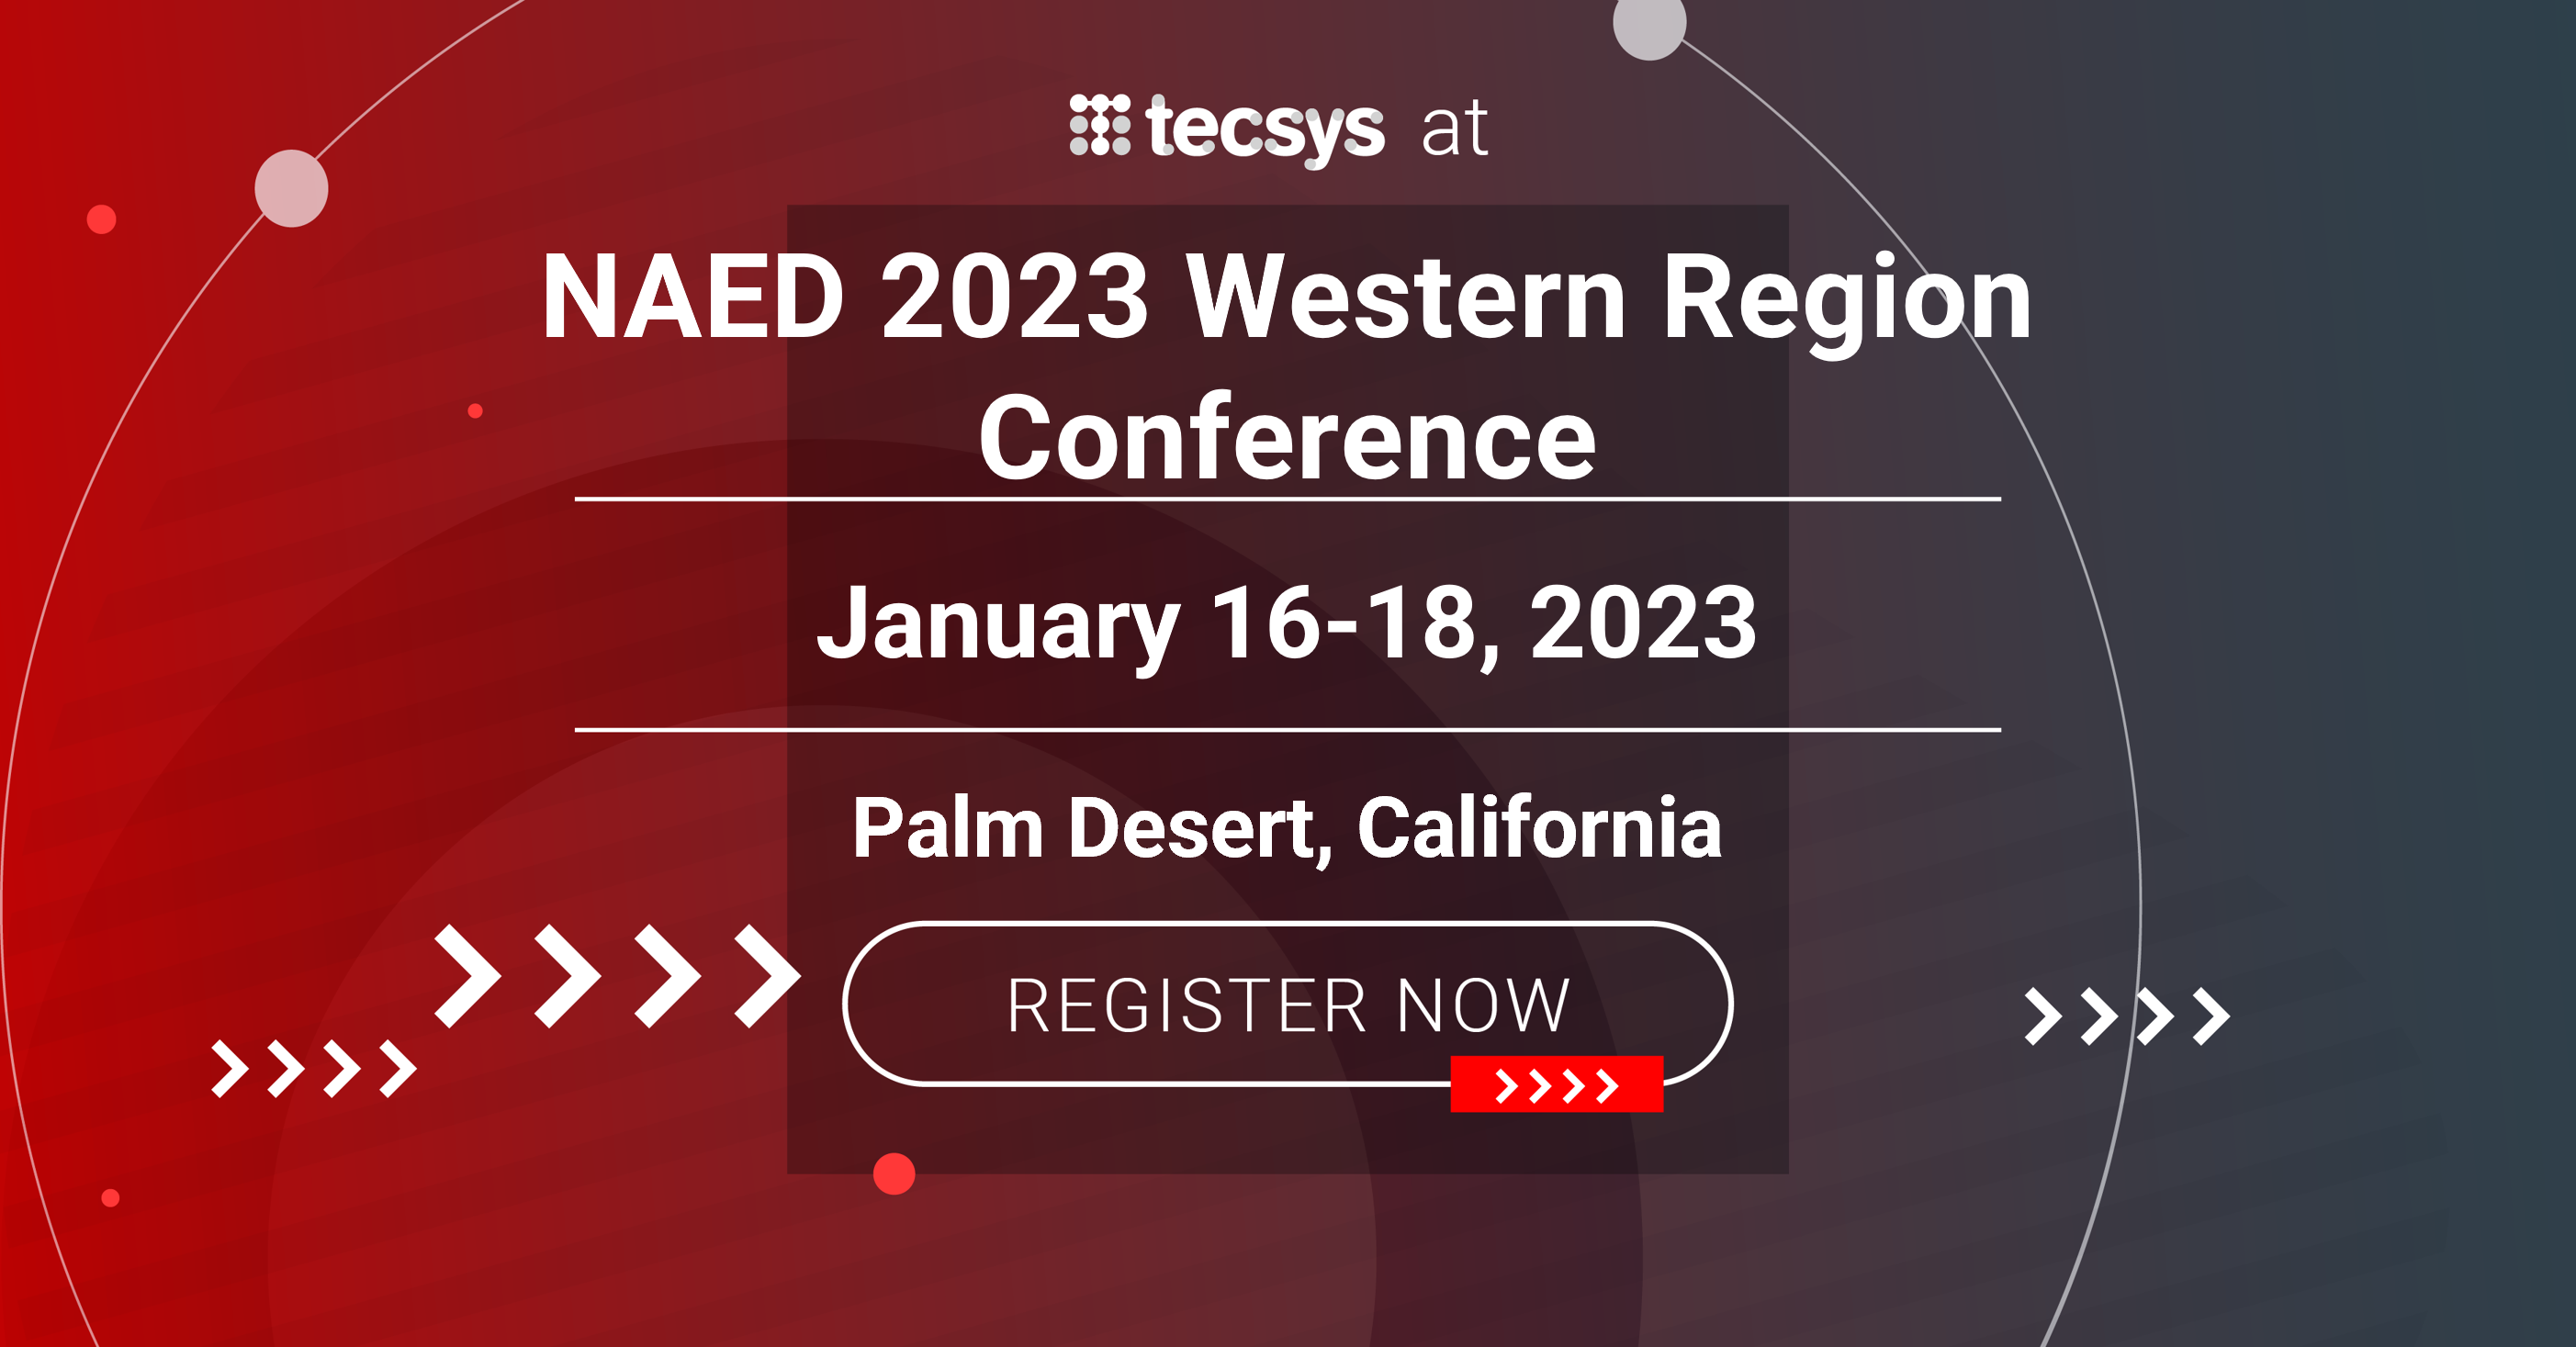 NAED Western Region Conference Tecsys